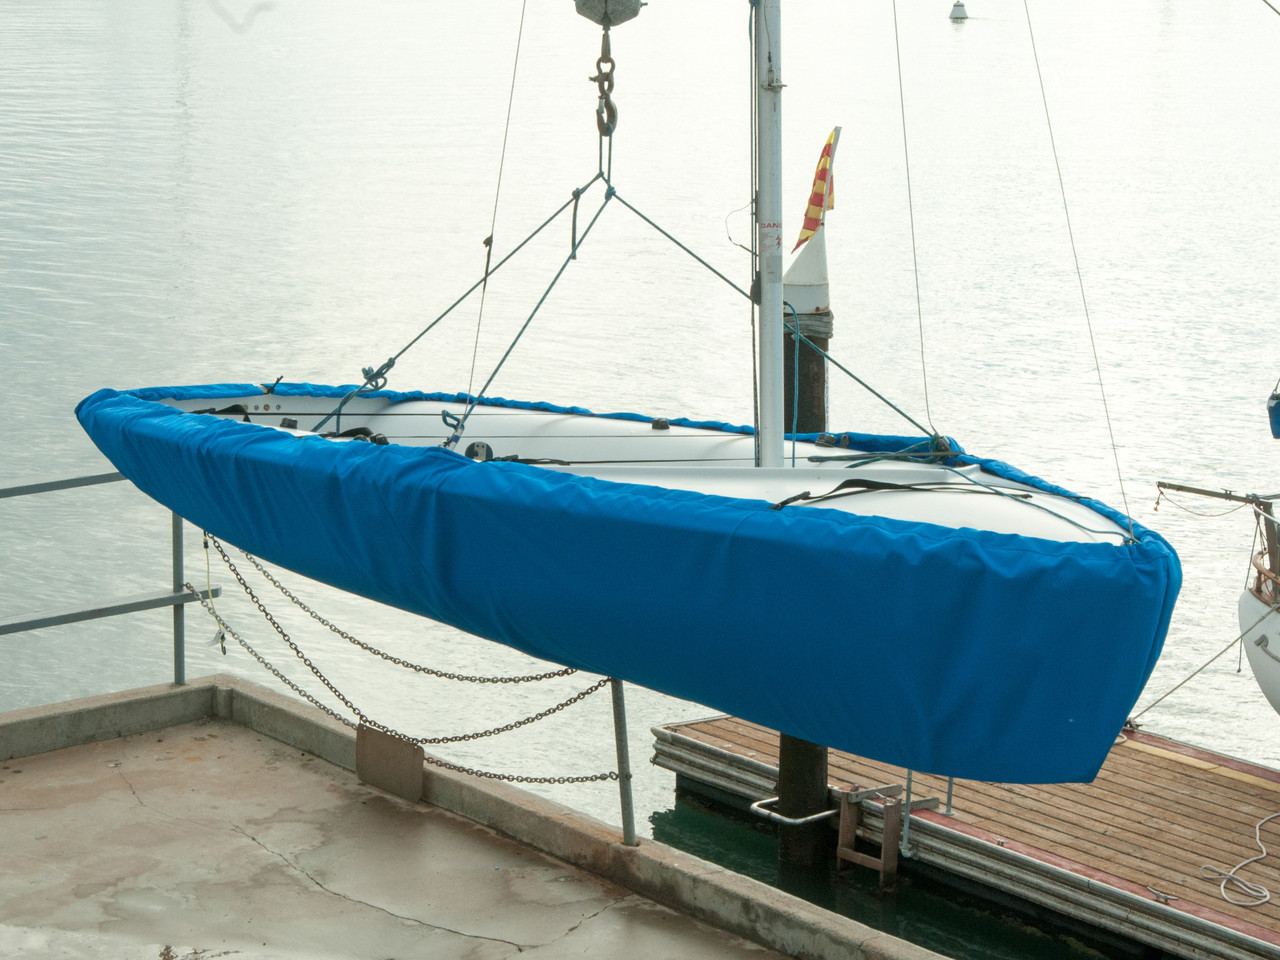 420 Sailboat Hull Cover made in America by skilled artisans at SLO Sail and Canvas.
